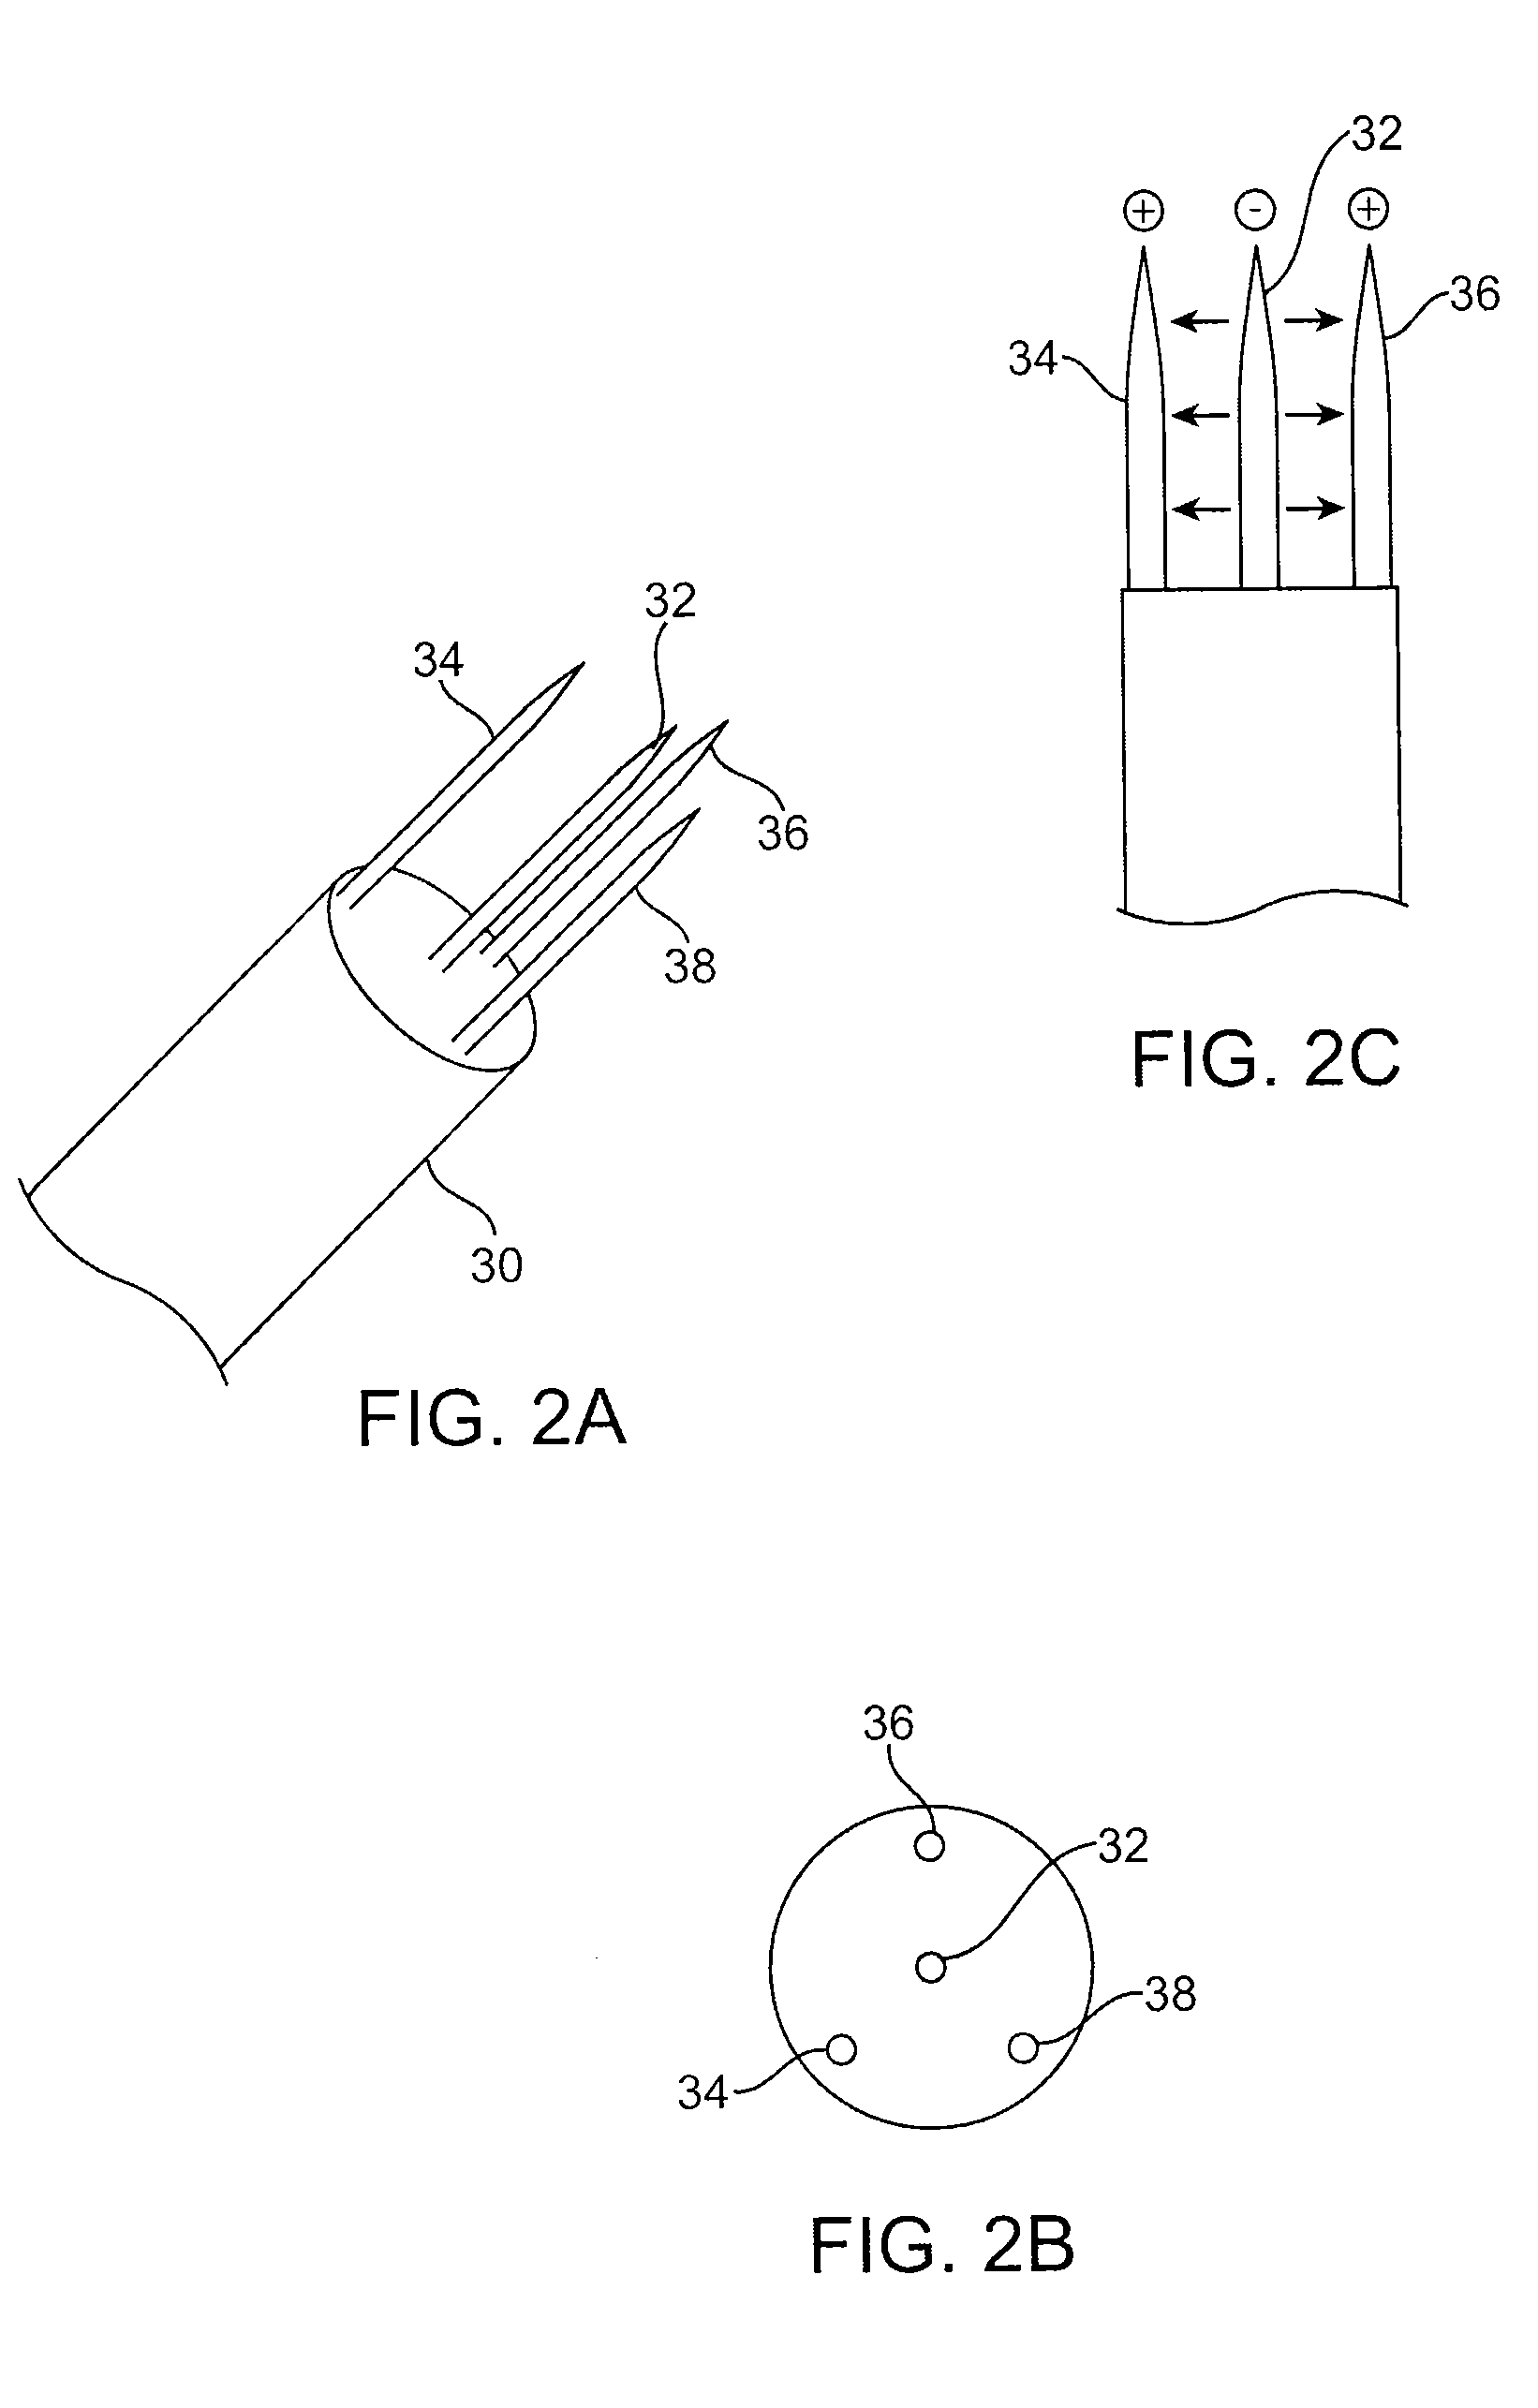 Multi-tine probe and treatment by activation of opposing tines